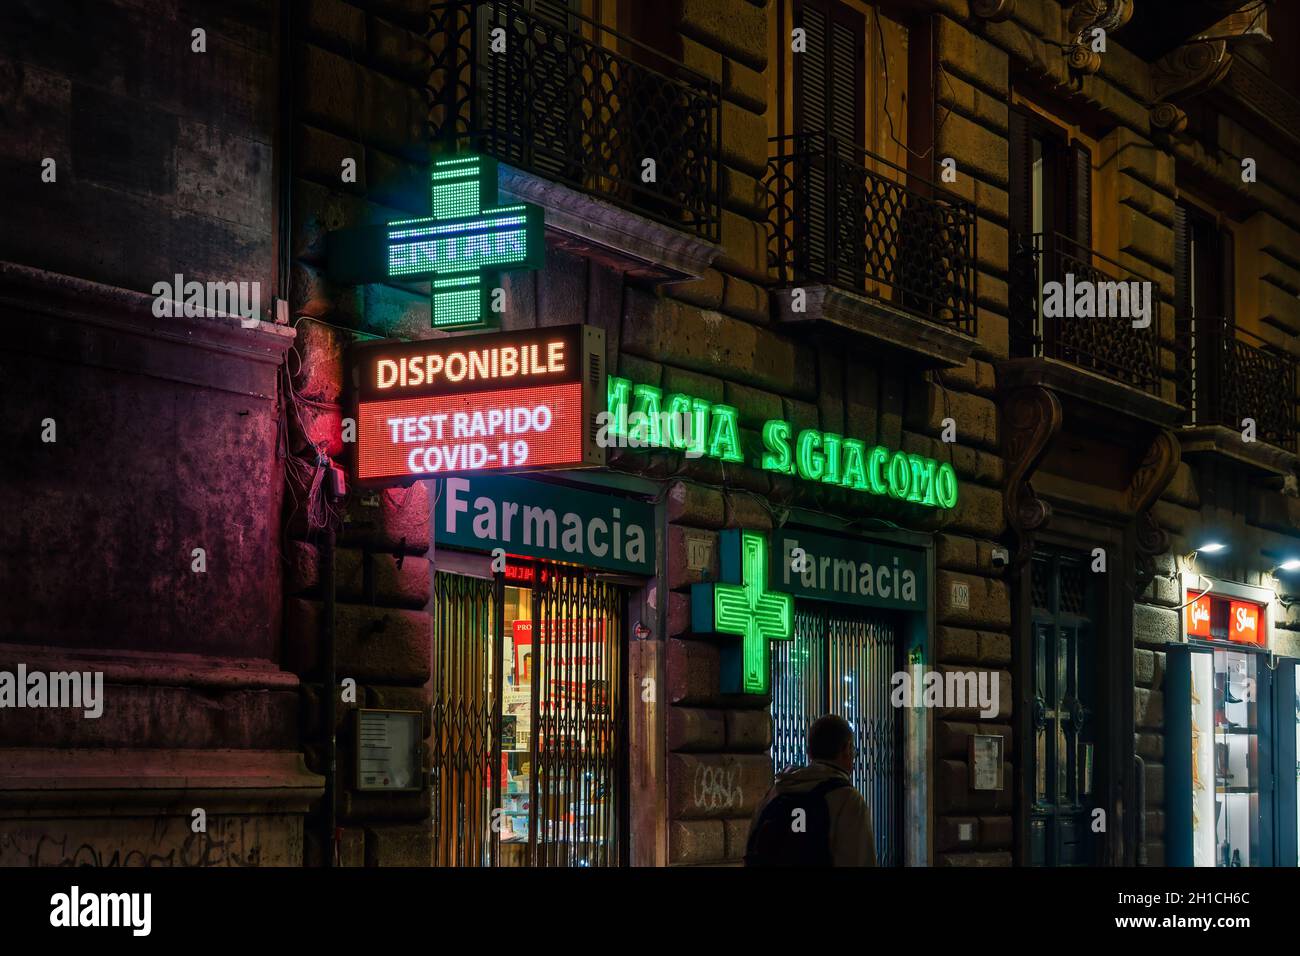 Rome, Italy open pharmacy store entrance with Covid-19 rapid test sign. External night view of Italian pharmaceutical shop with illuminated green display and window showcase. Stock Photo